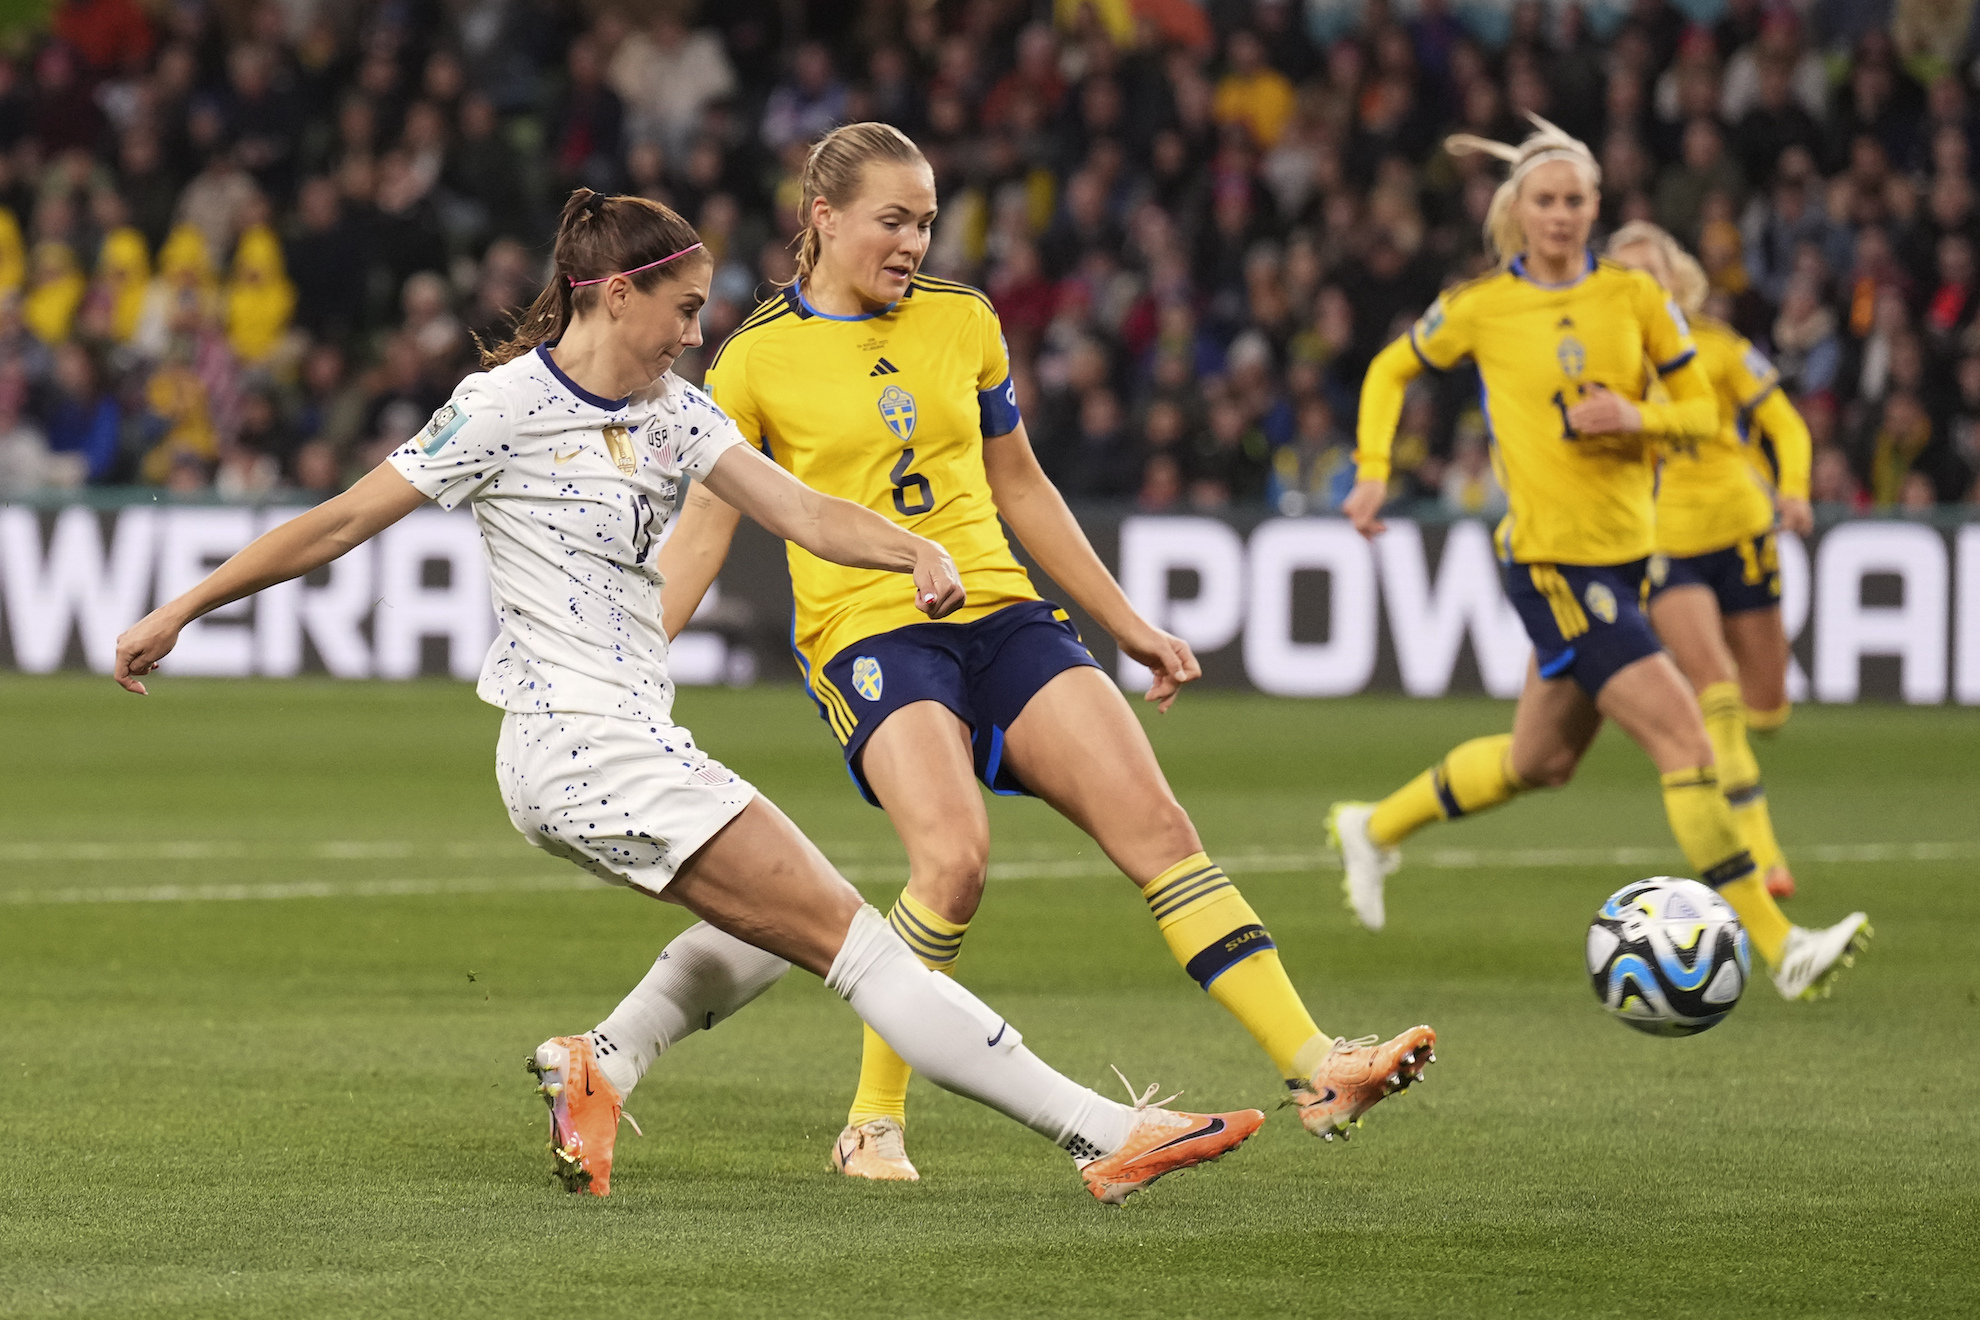 United States' Alex Morgan, left, takes a shot at goal as Sweden's Magdalena Eriksson watches during the Women's World Cup round of 16 soccer match between Sweden and the United States in Melbourne, Australia, Sunday, Aug. 6, 2023